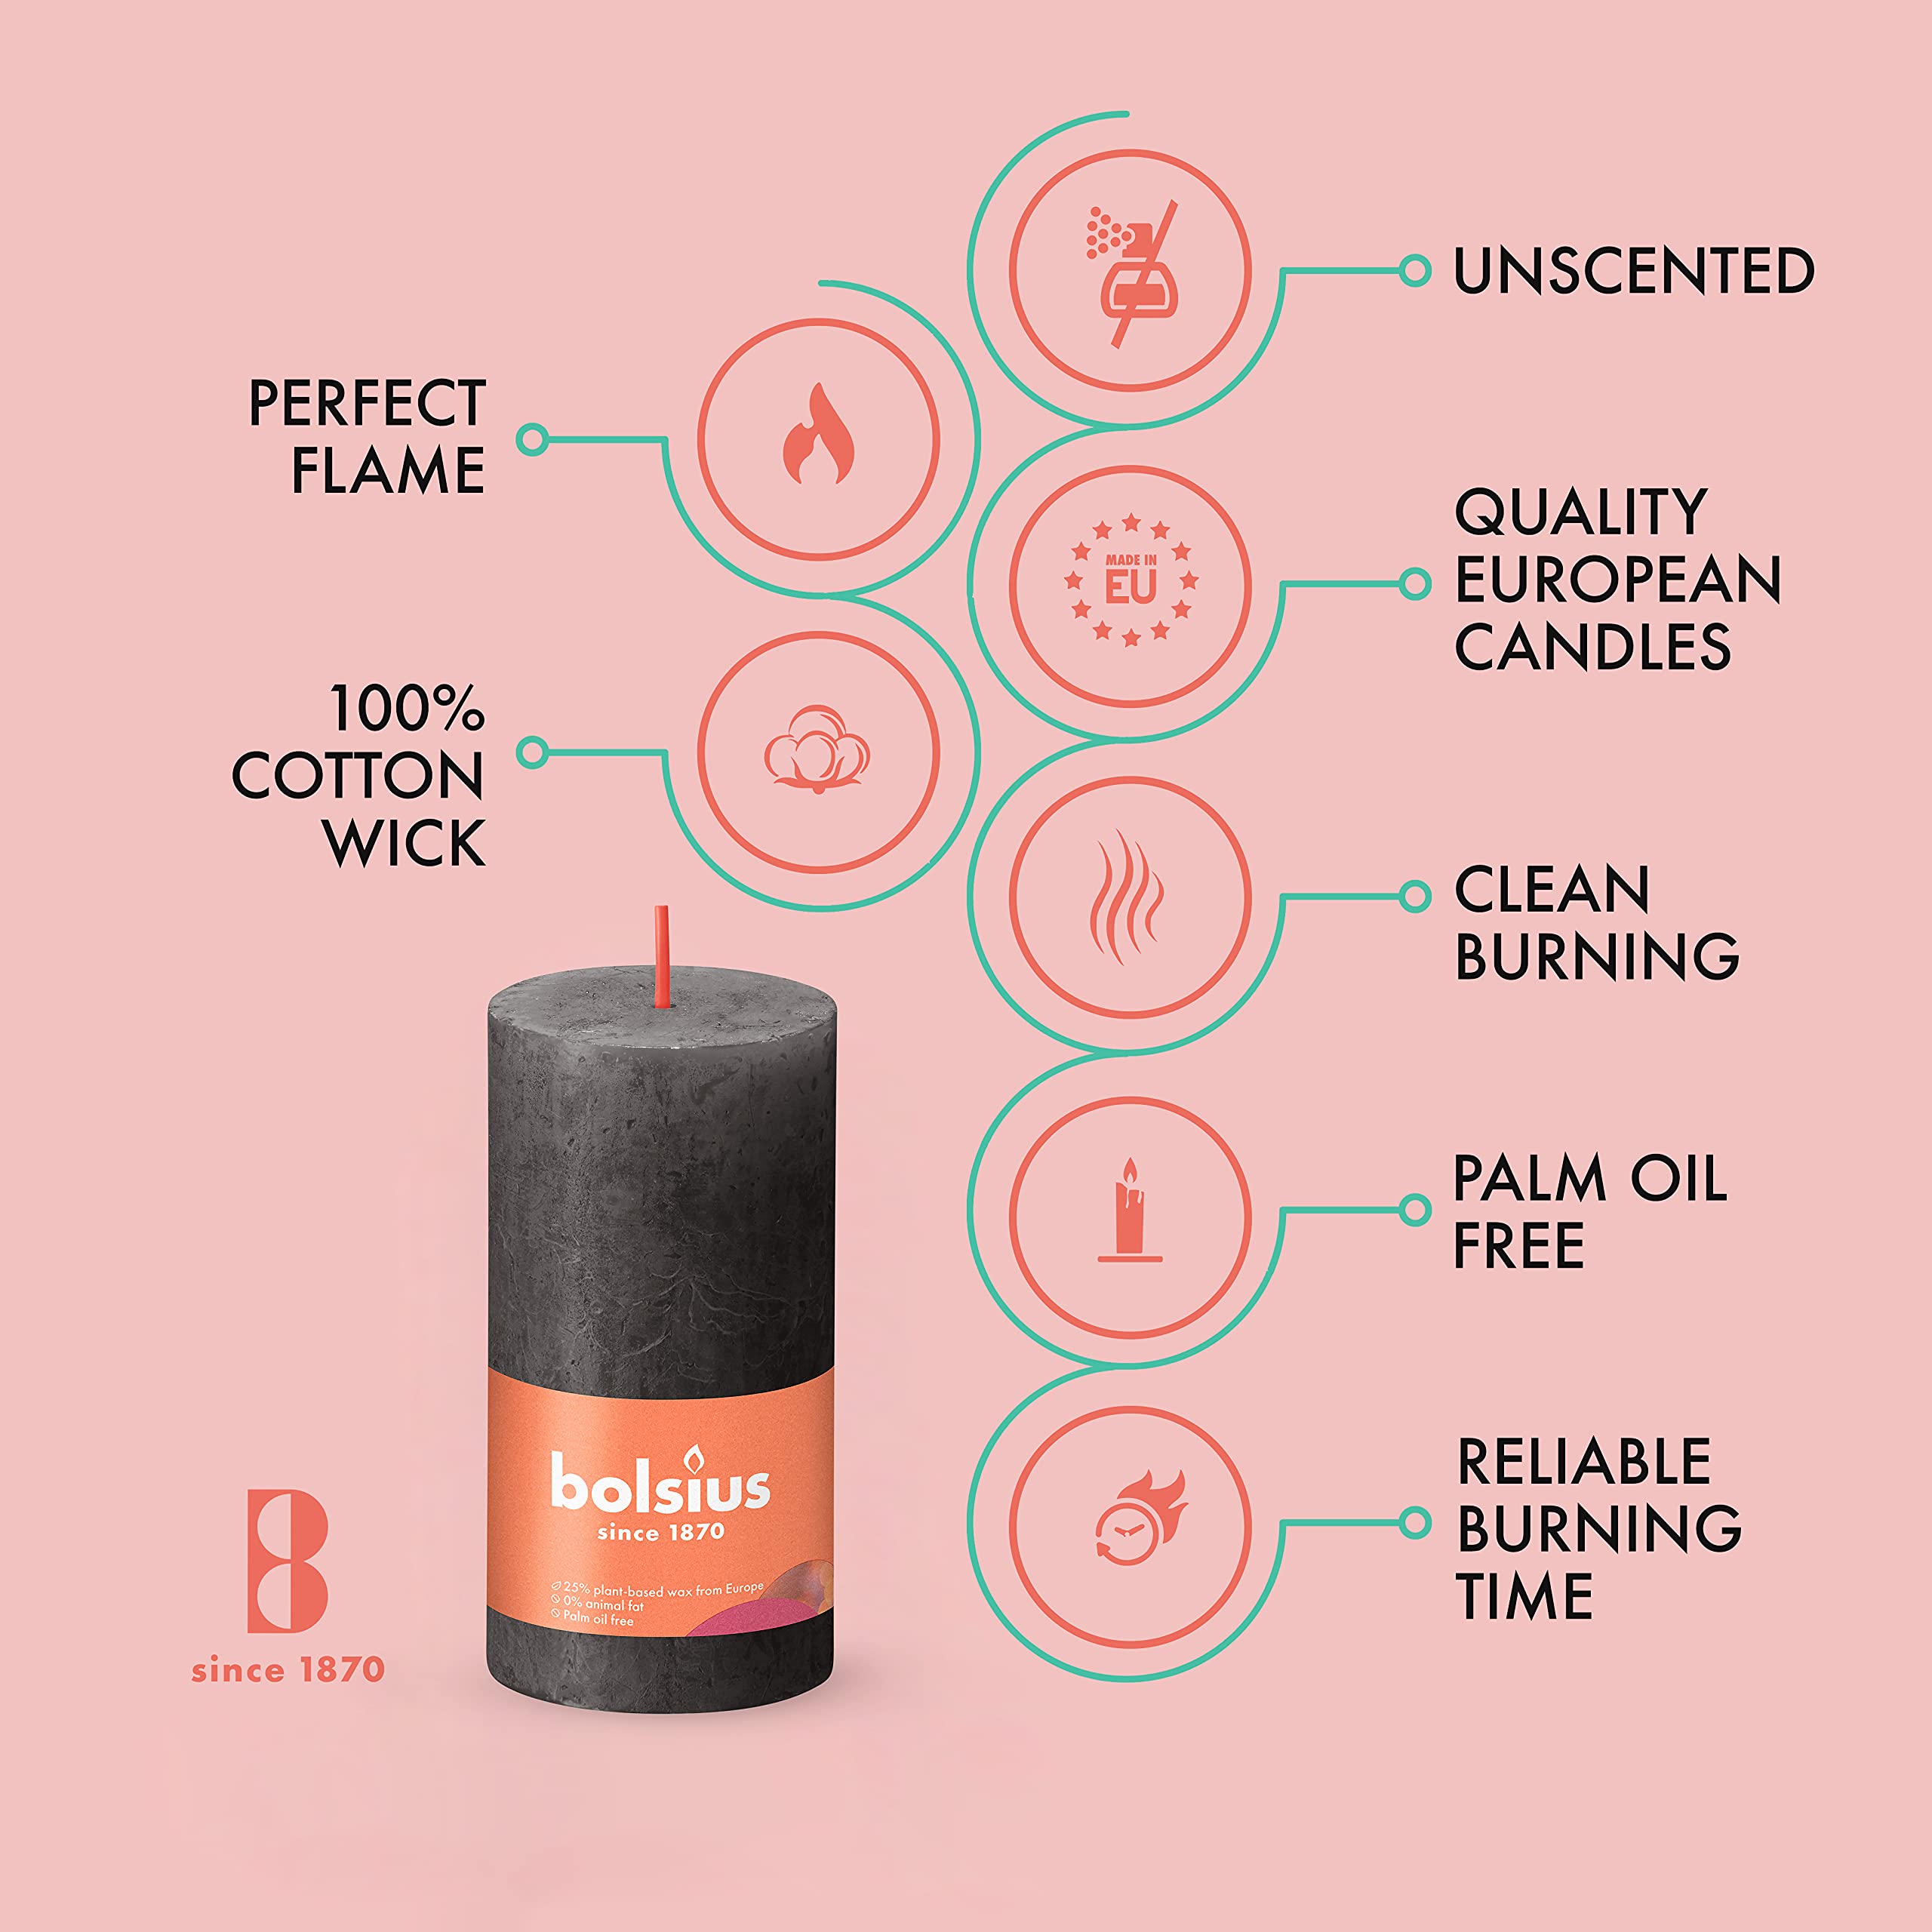 BOLSIUS 4 Pack Stormy Gray Rustic Pillar Candles - 2 X 4 Inches - Premium European Quality - Includes Natural Plant-Based Wax - Unscented Dripless Smokeless 30 Hour Party D�cor and Wedding Candles  - Very Good